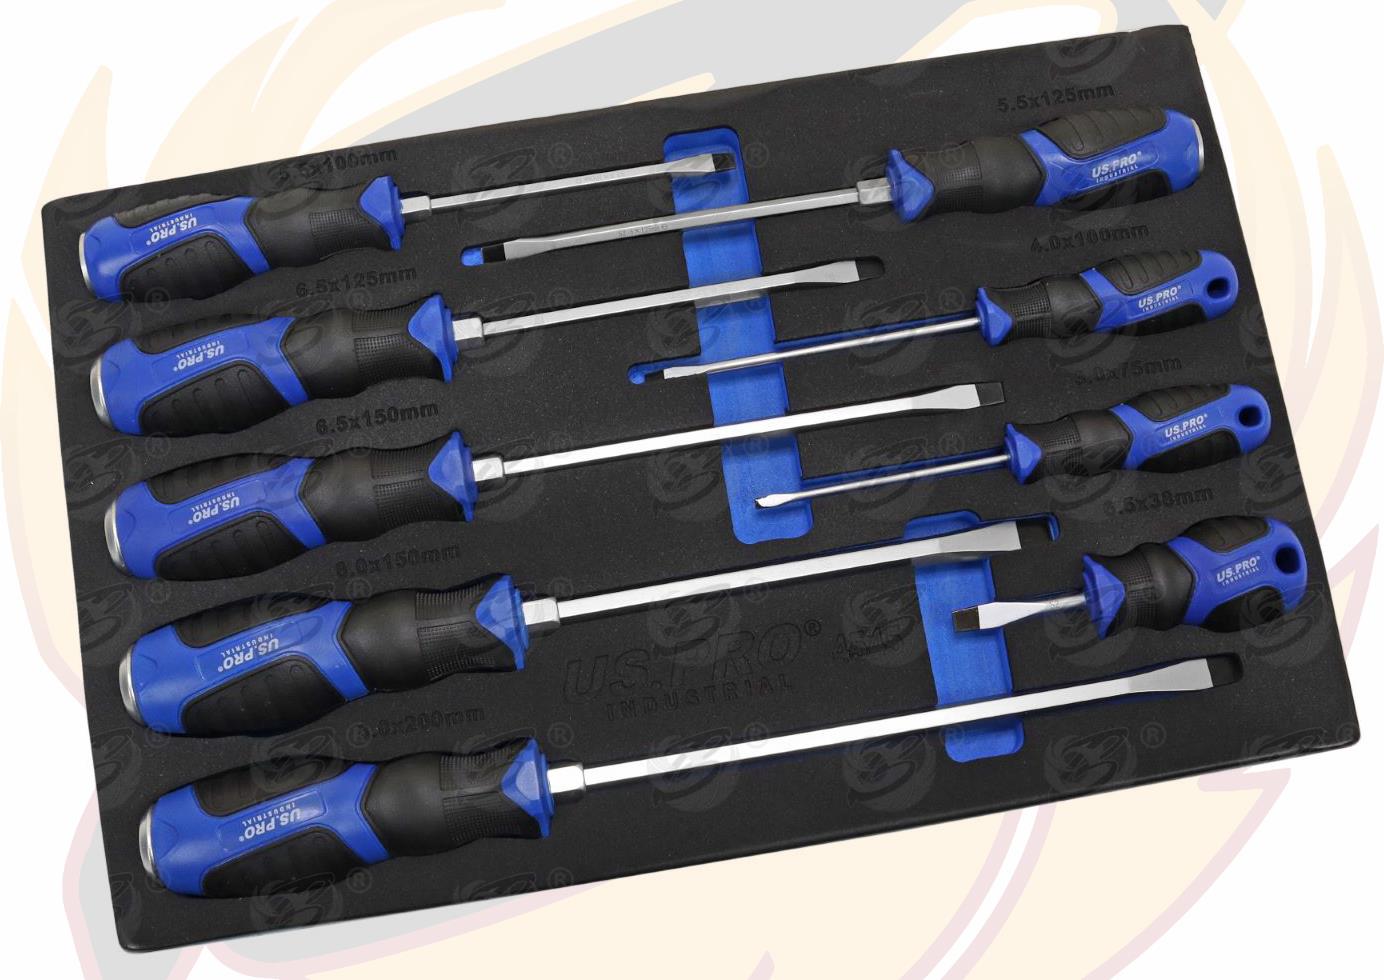 US PRO INDUSTRIAL 9PCS MAGNETIC GO THROUGH SCREWDRIVER SET ( SLOTTED )